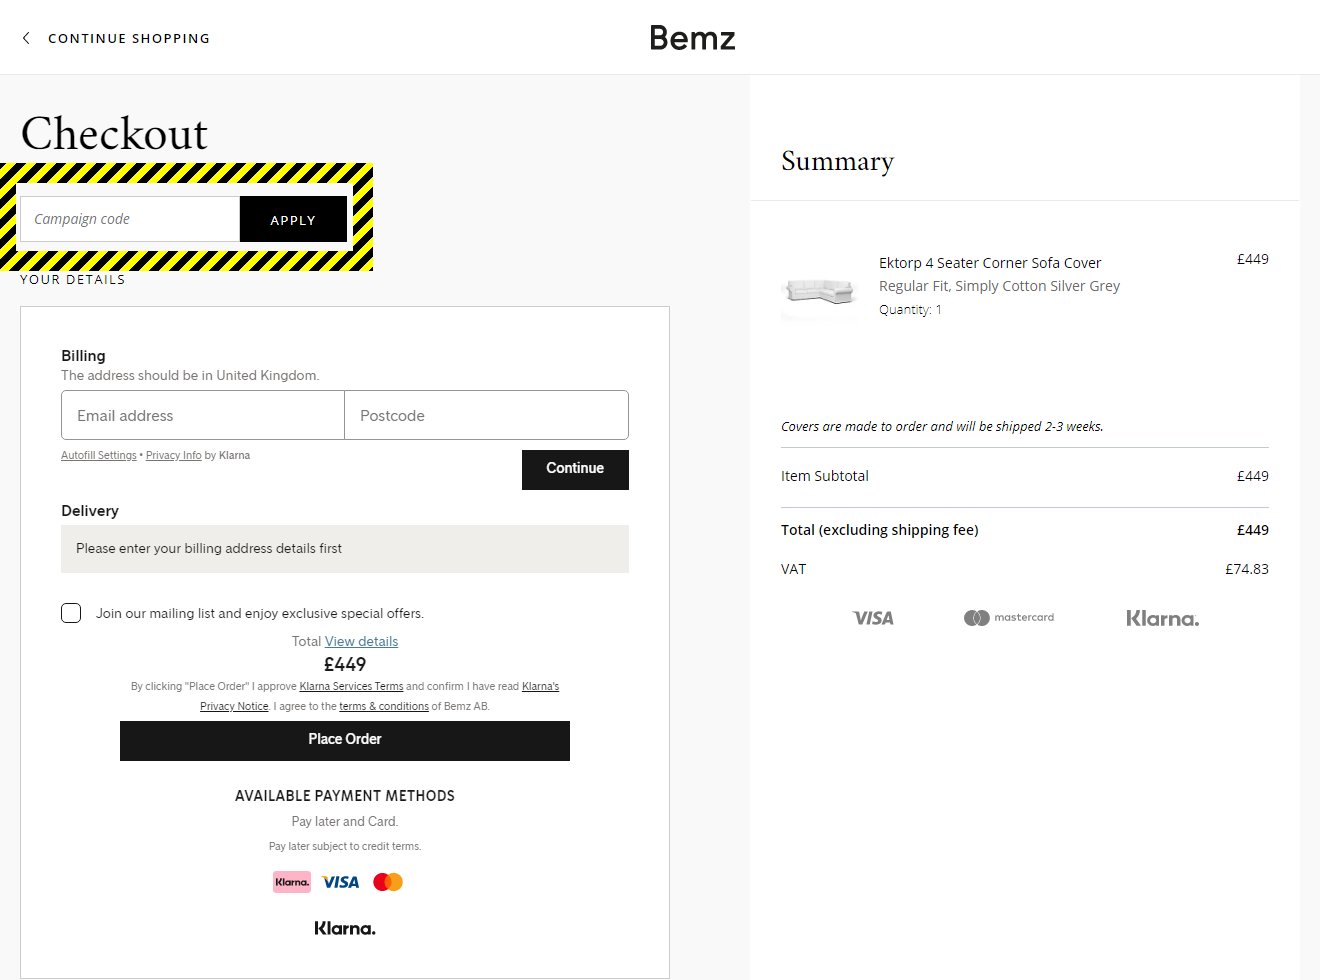 How to use a Bemz Discount Code